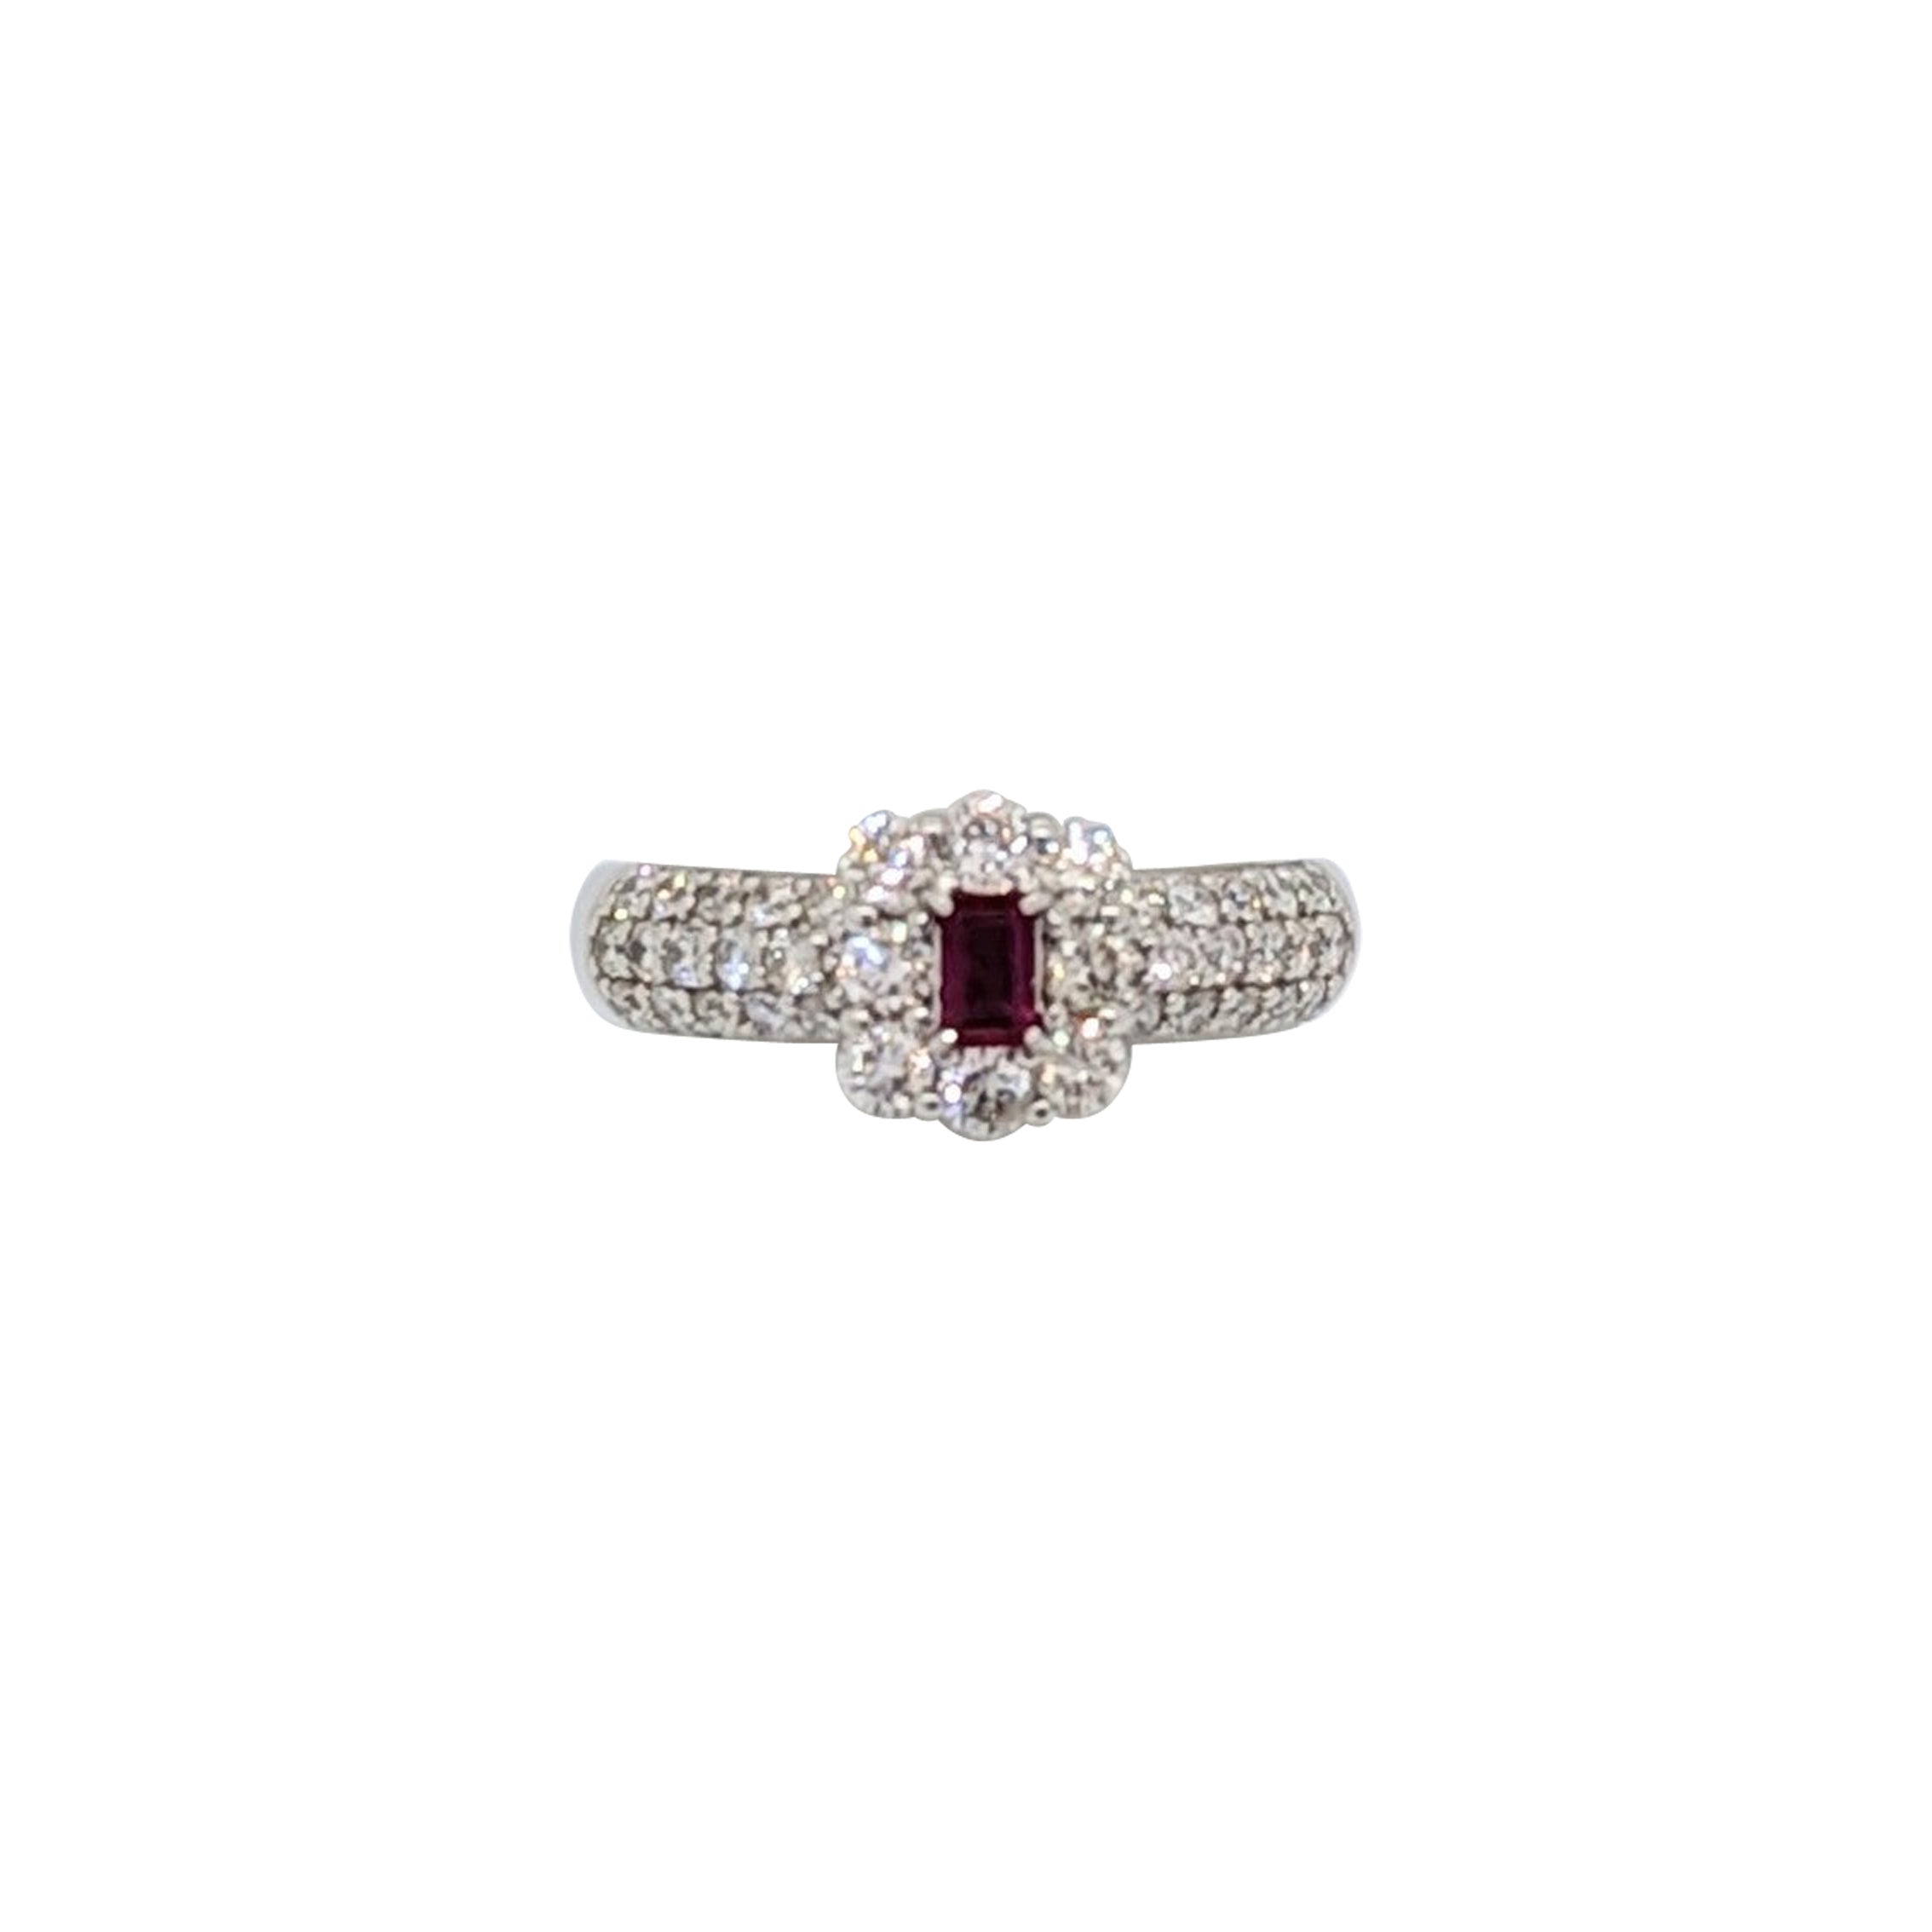 Ruby Emerald Cut and White Diamond Round Ring in Platinum